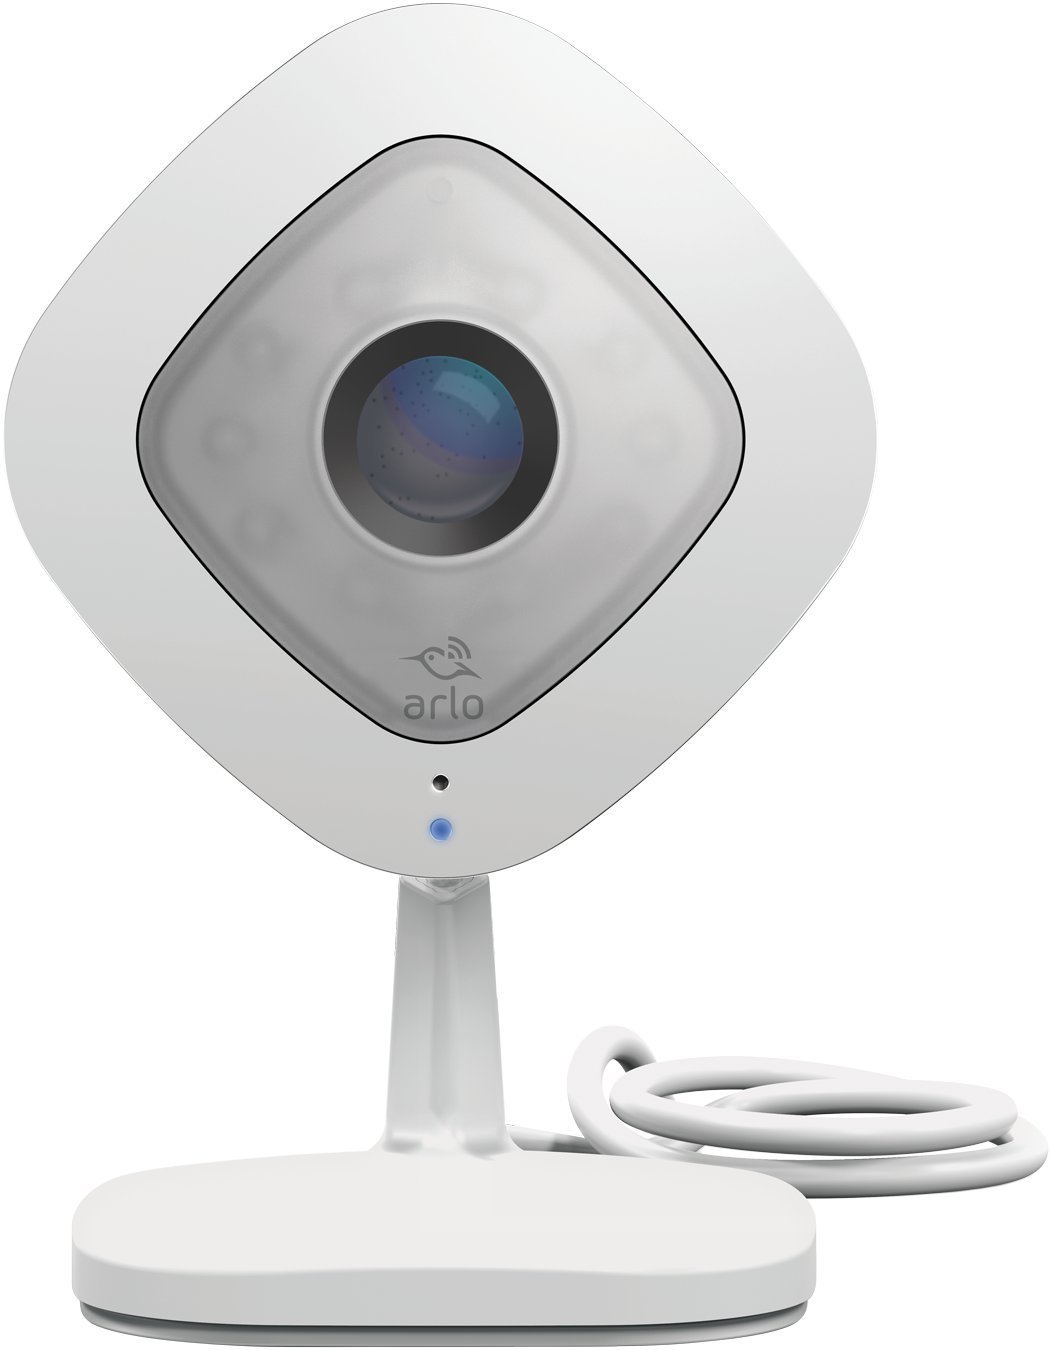 Netgear Arlo Q Security Camera On Sale for $119 [Deal]